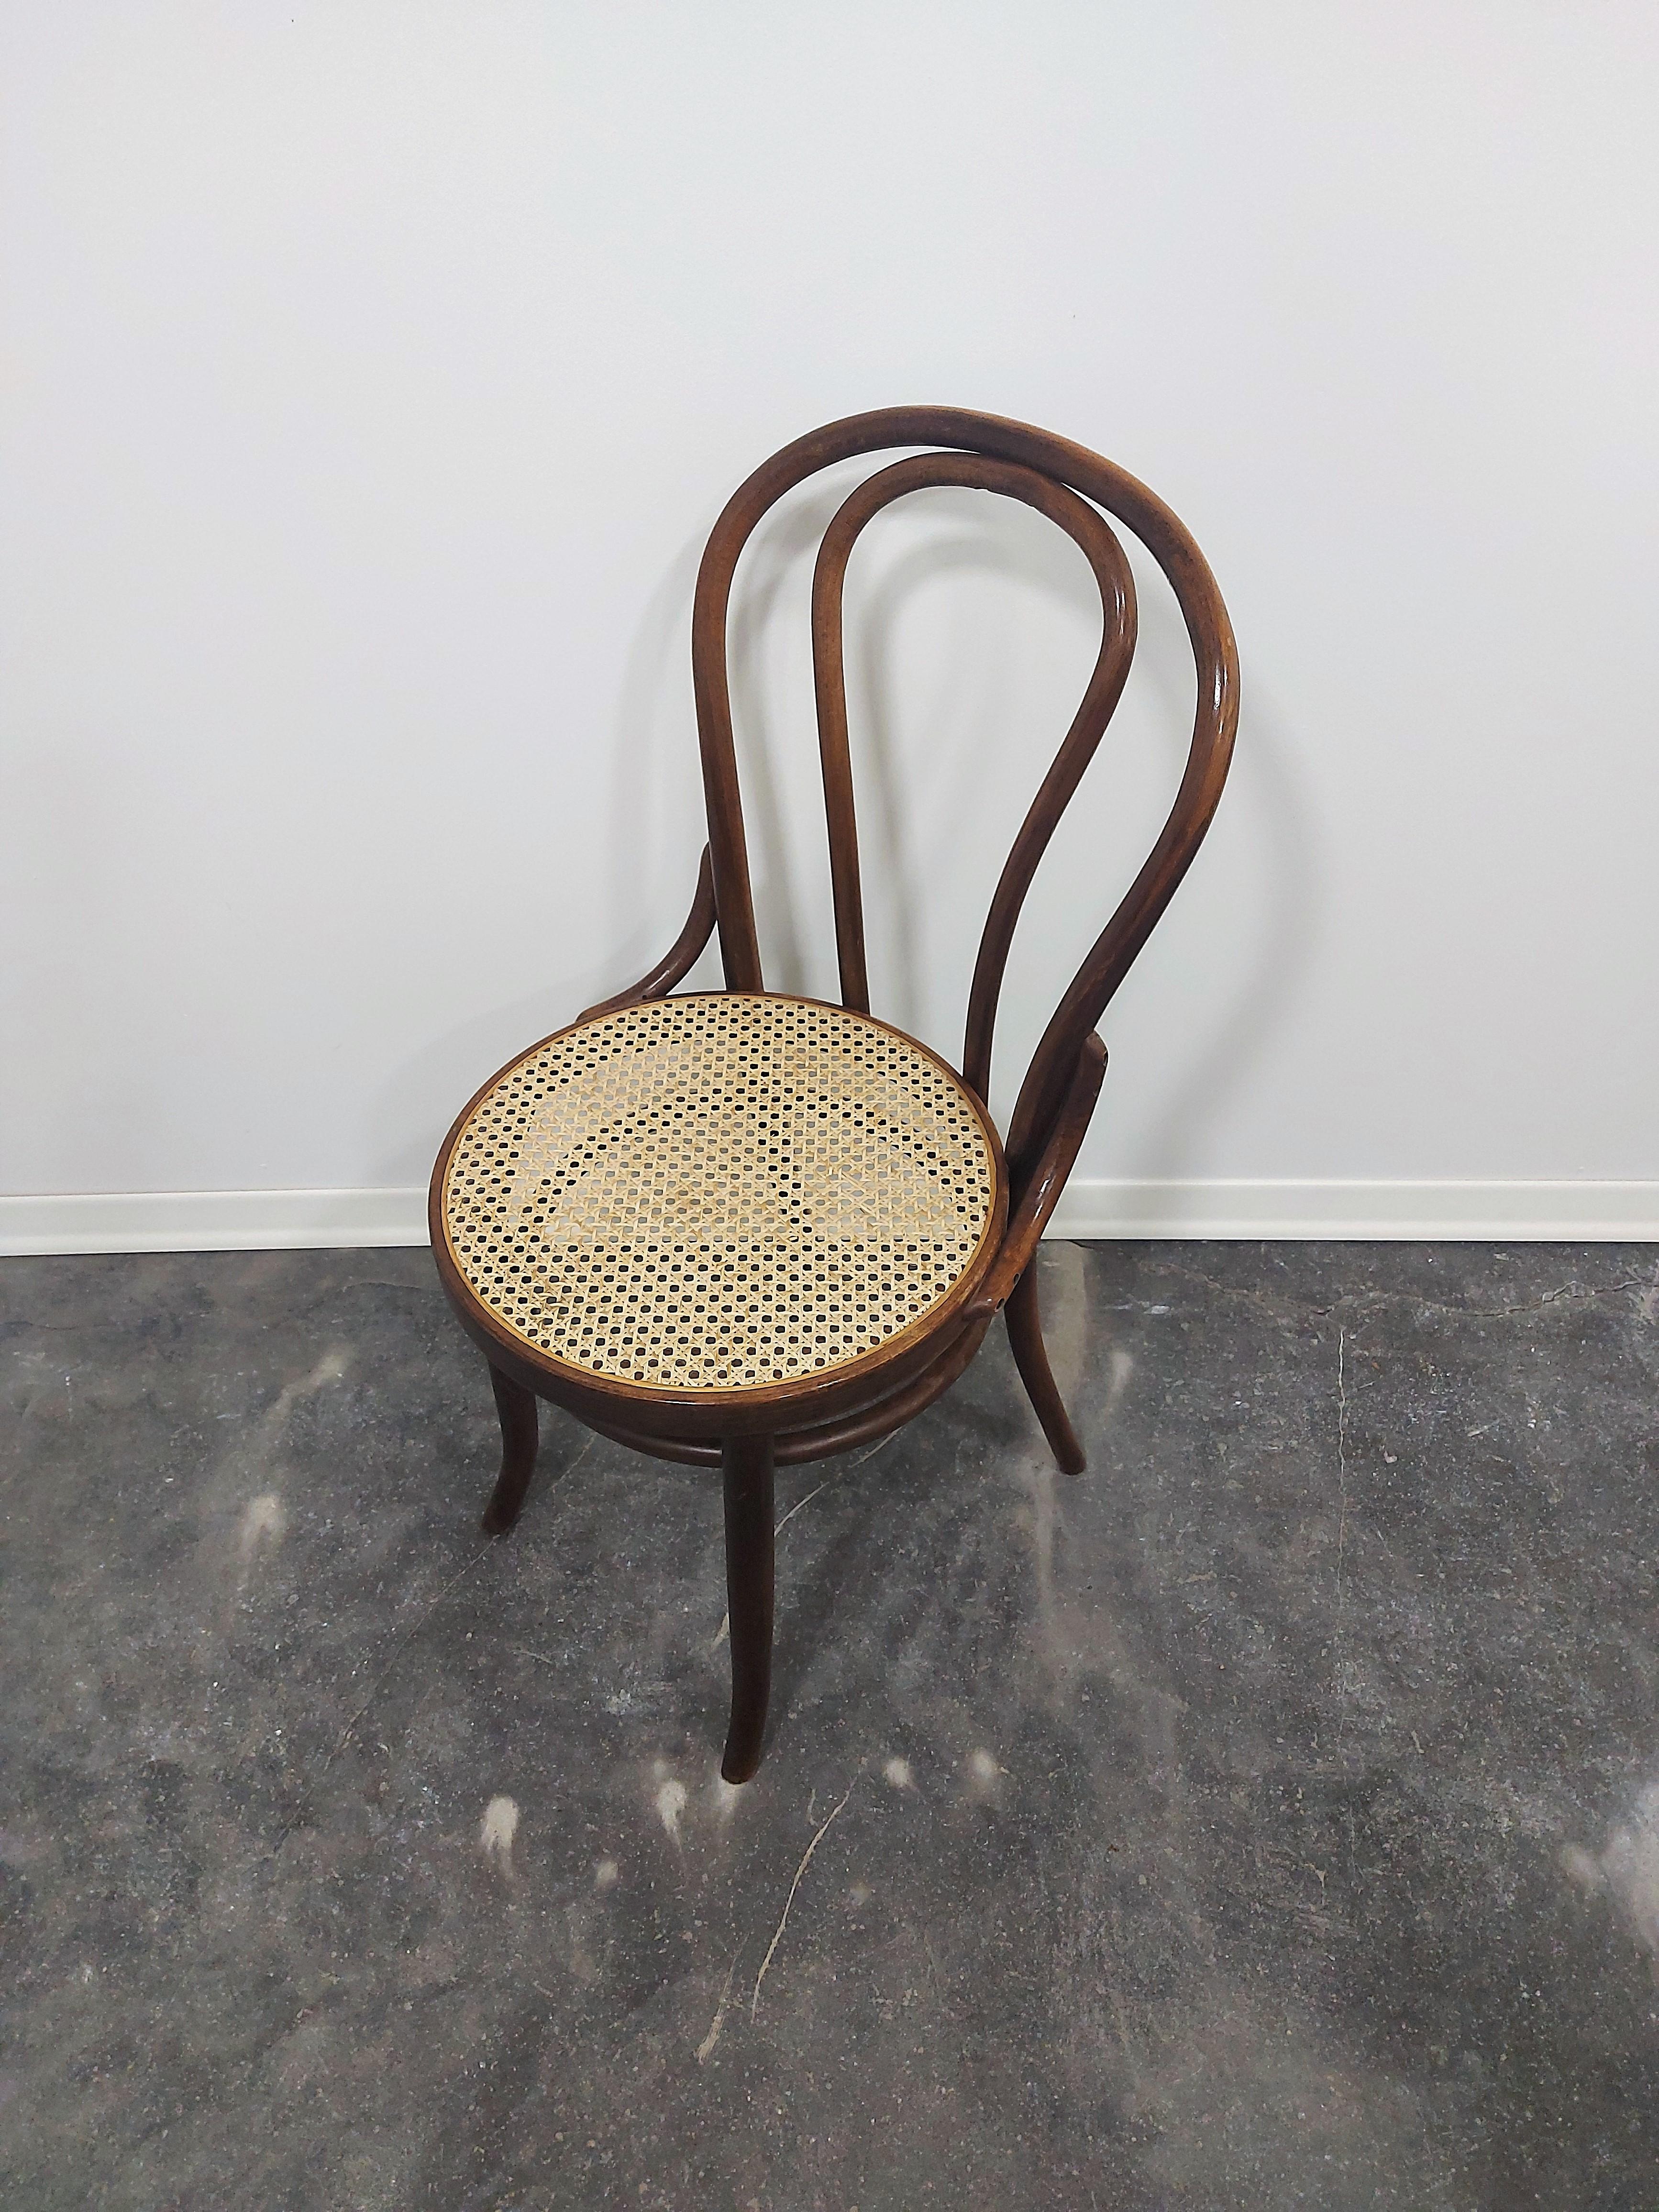 Dining chair No. 18 